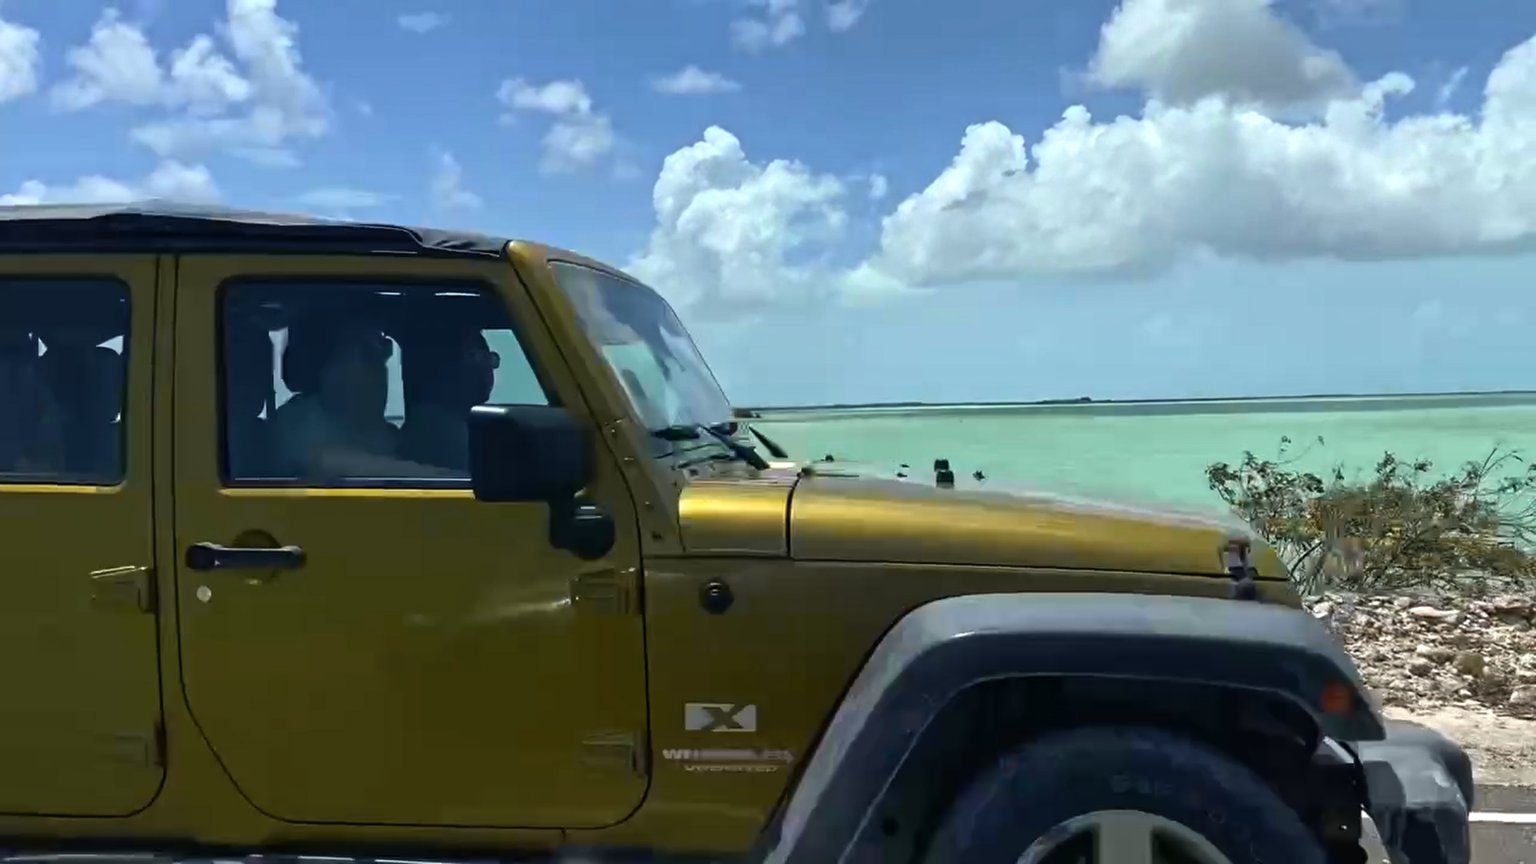 A rental car in North Caicos on the causaway